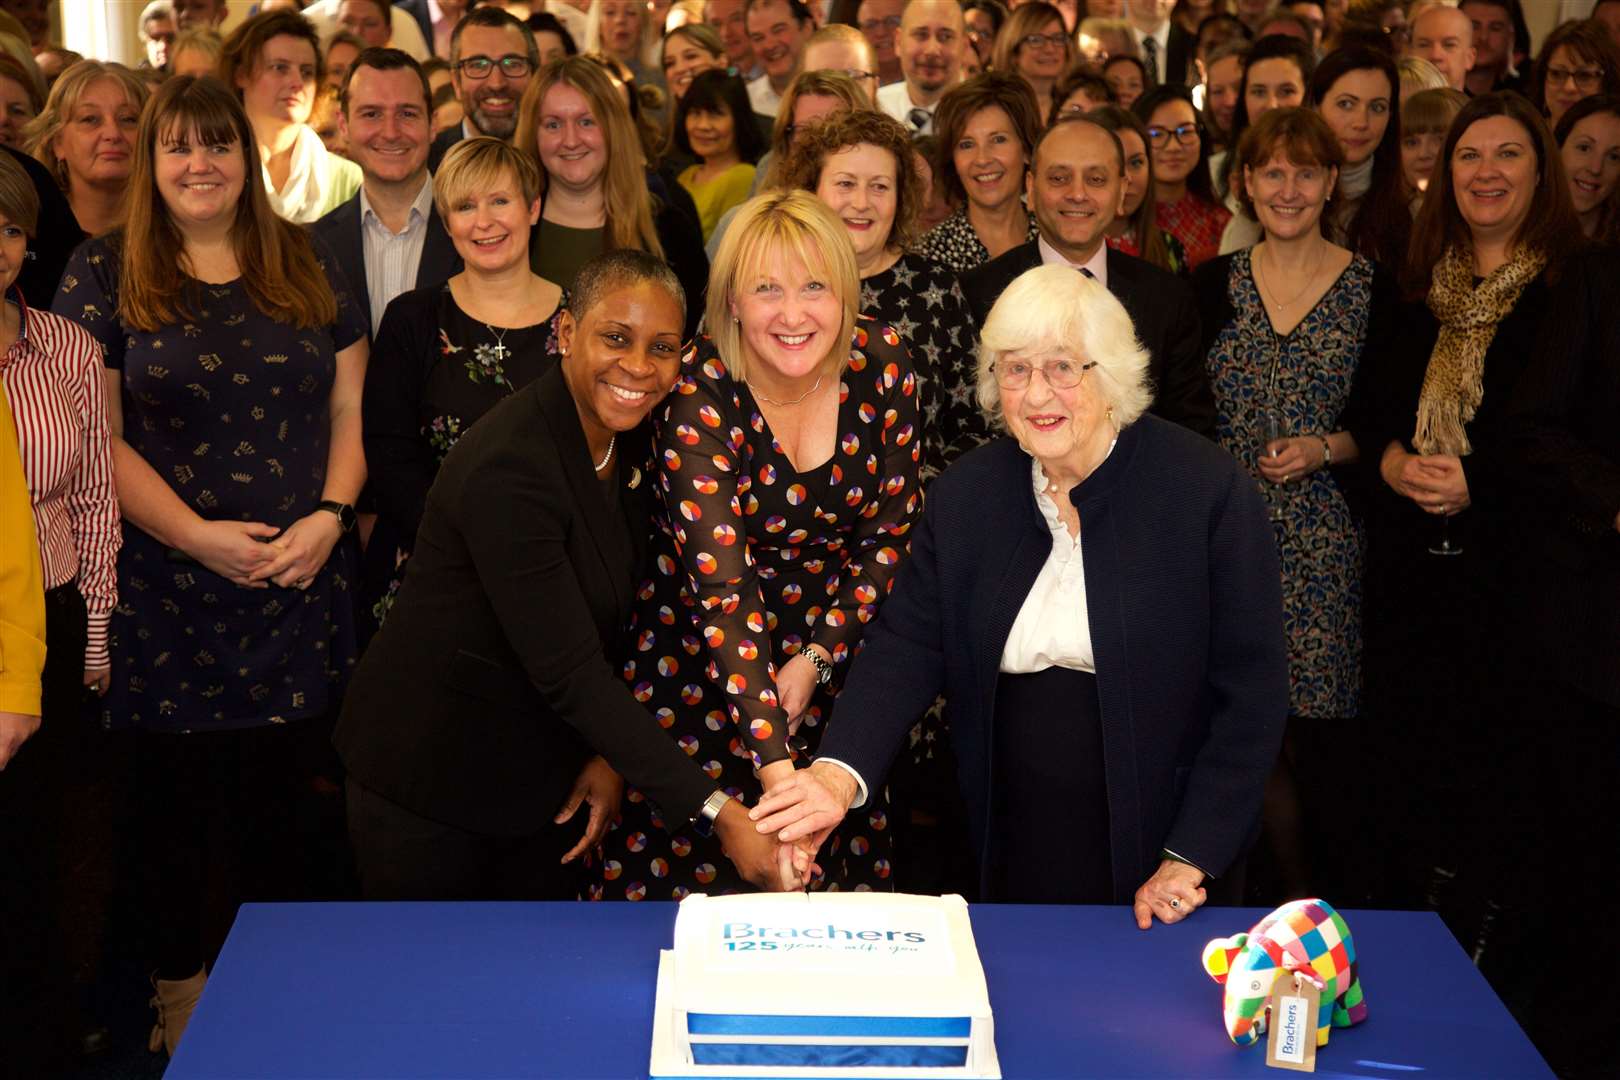 From left: Guest Stephanie Boyce (deputy vice-president of the Law Society), managing partner Joanna Worby and Sarah Bracher (wife of late George Bracher) cut a cake to mark the firm's 125th anniversary